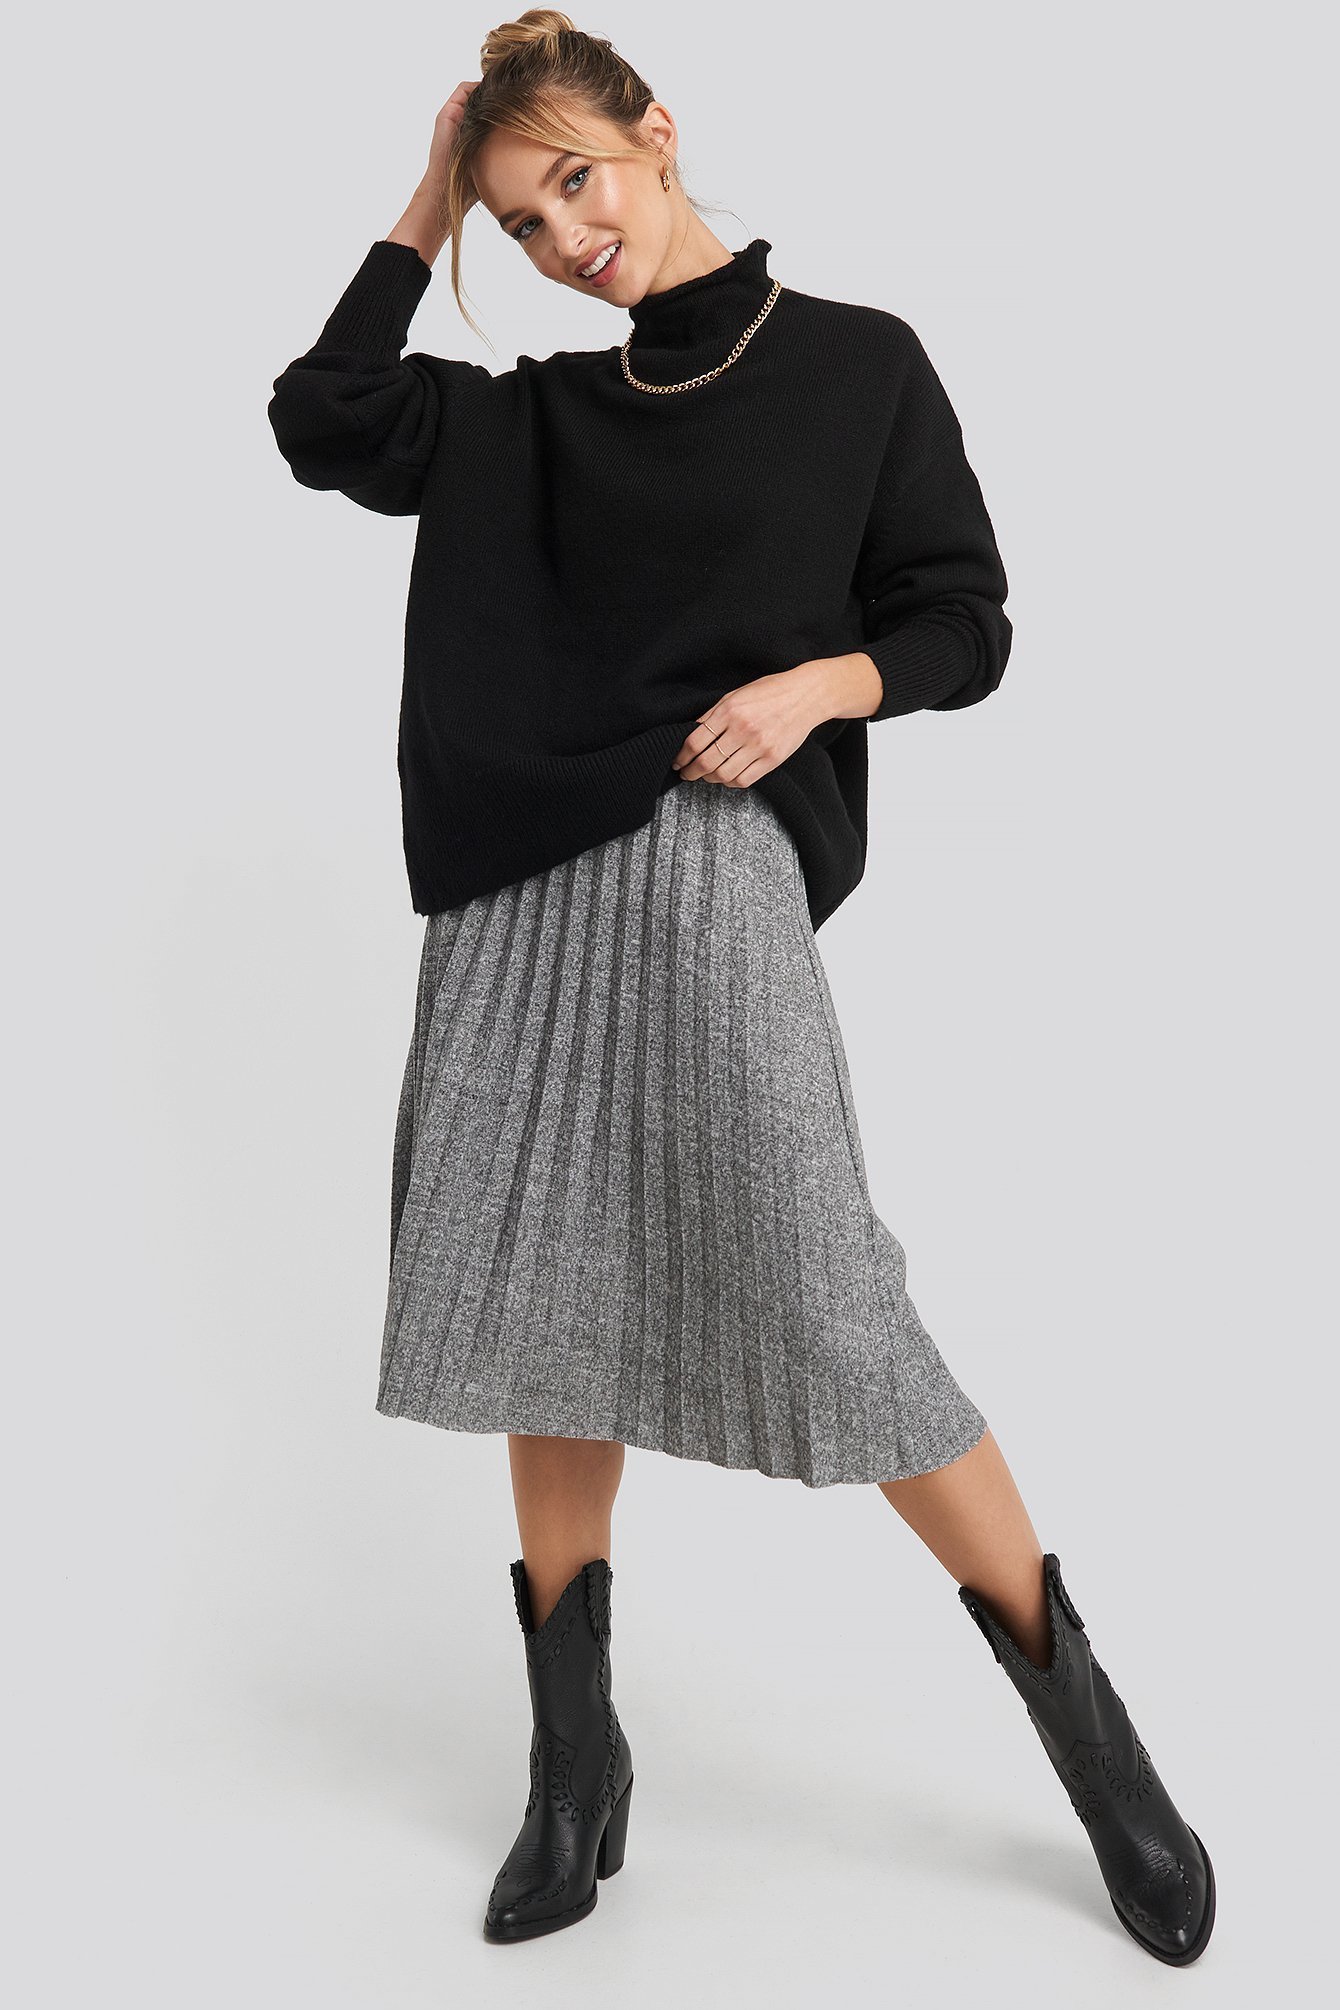 Eyelash Pleated Knitted Skirt Outfit.